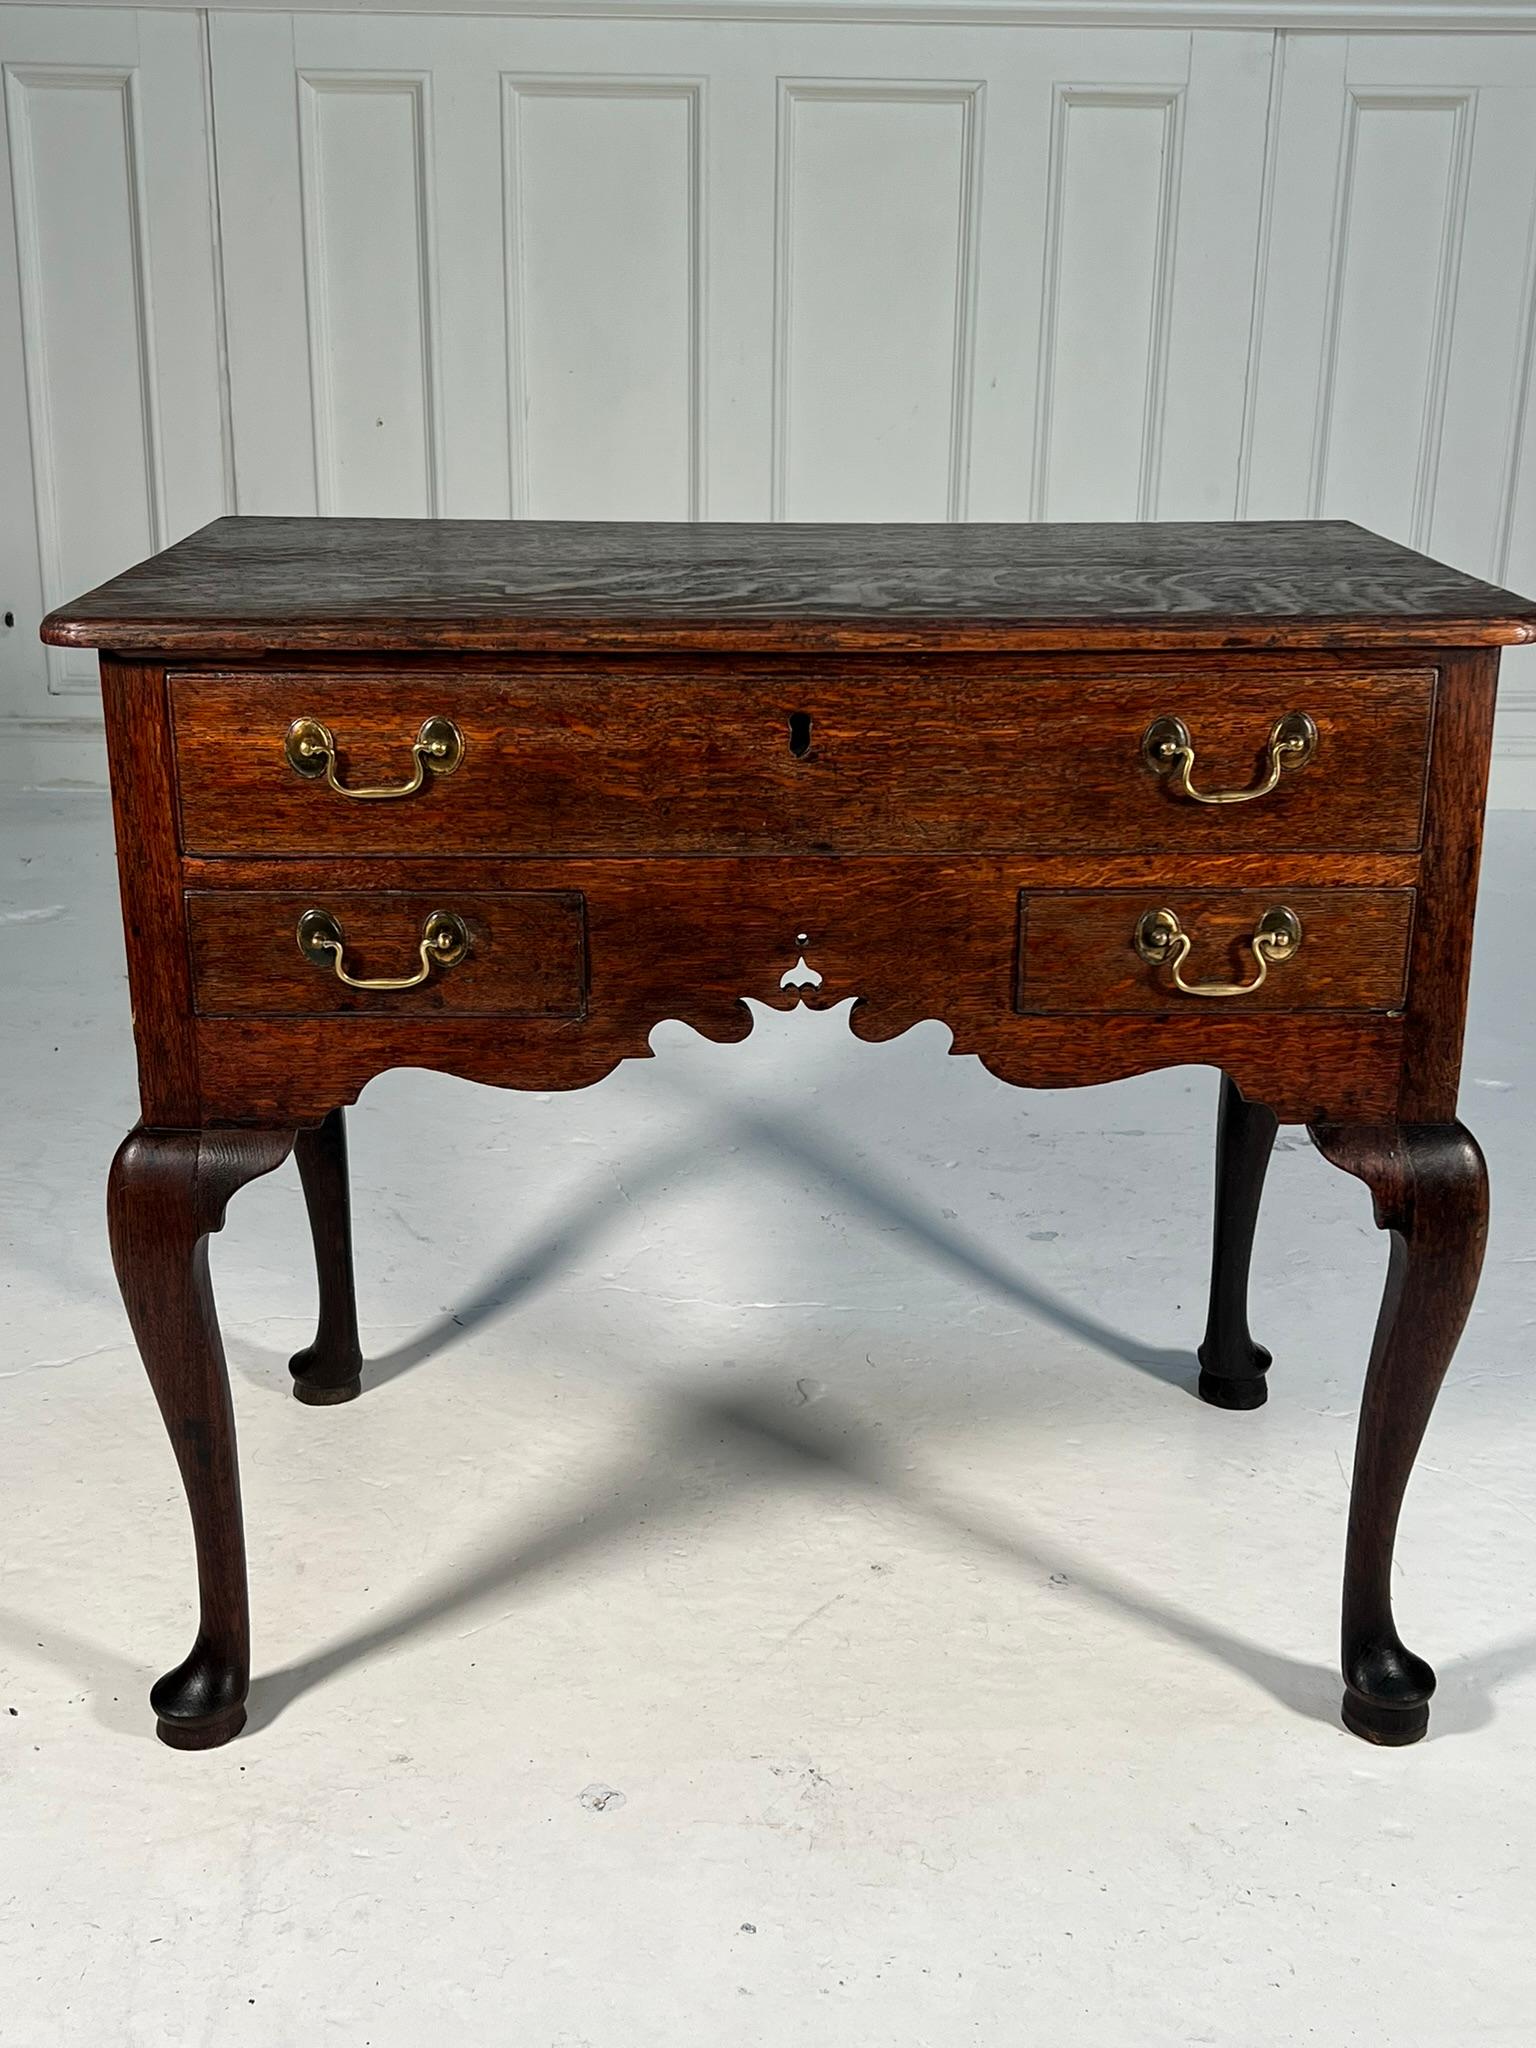 Georgian oak lowboy raised on cabrio legs, joined by a sweeping apron with some fretwork detail.

Wonderful patination to the timber, especially the top surface where the vibrant medullary rays pop from the dark quarter sawn oak.

Height 72cm
Width